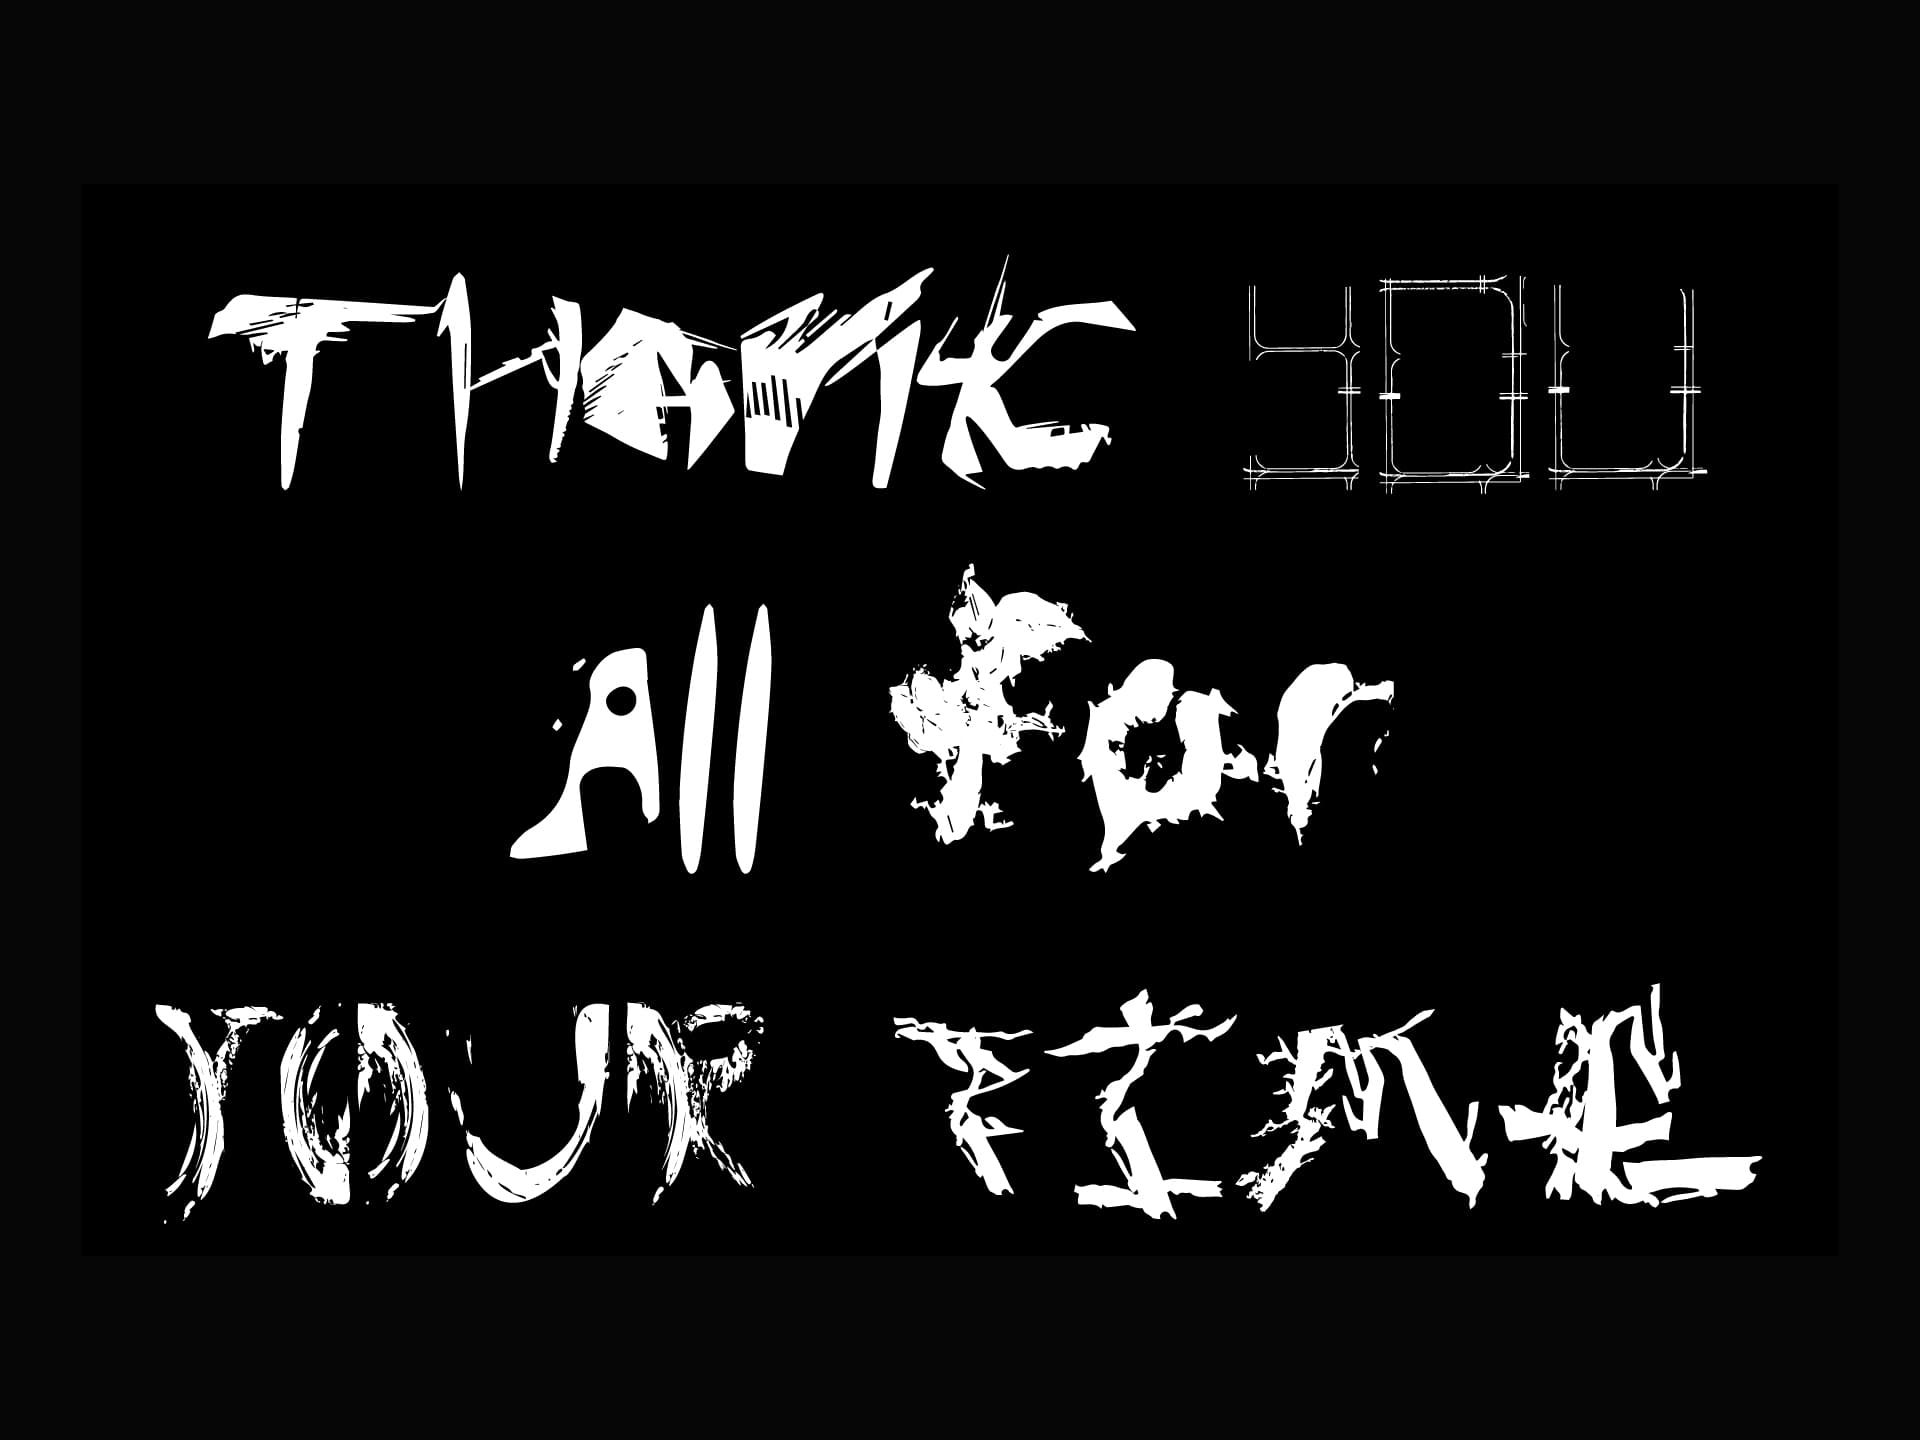 Closing slide (”THANK YOU ALL FOR YOUR TIME”)